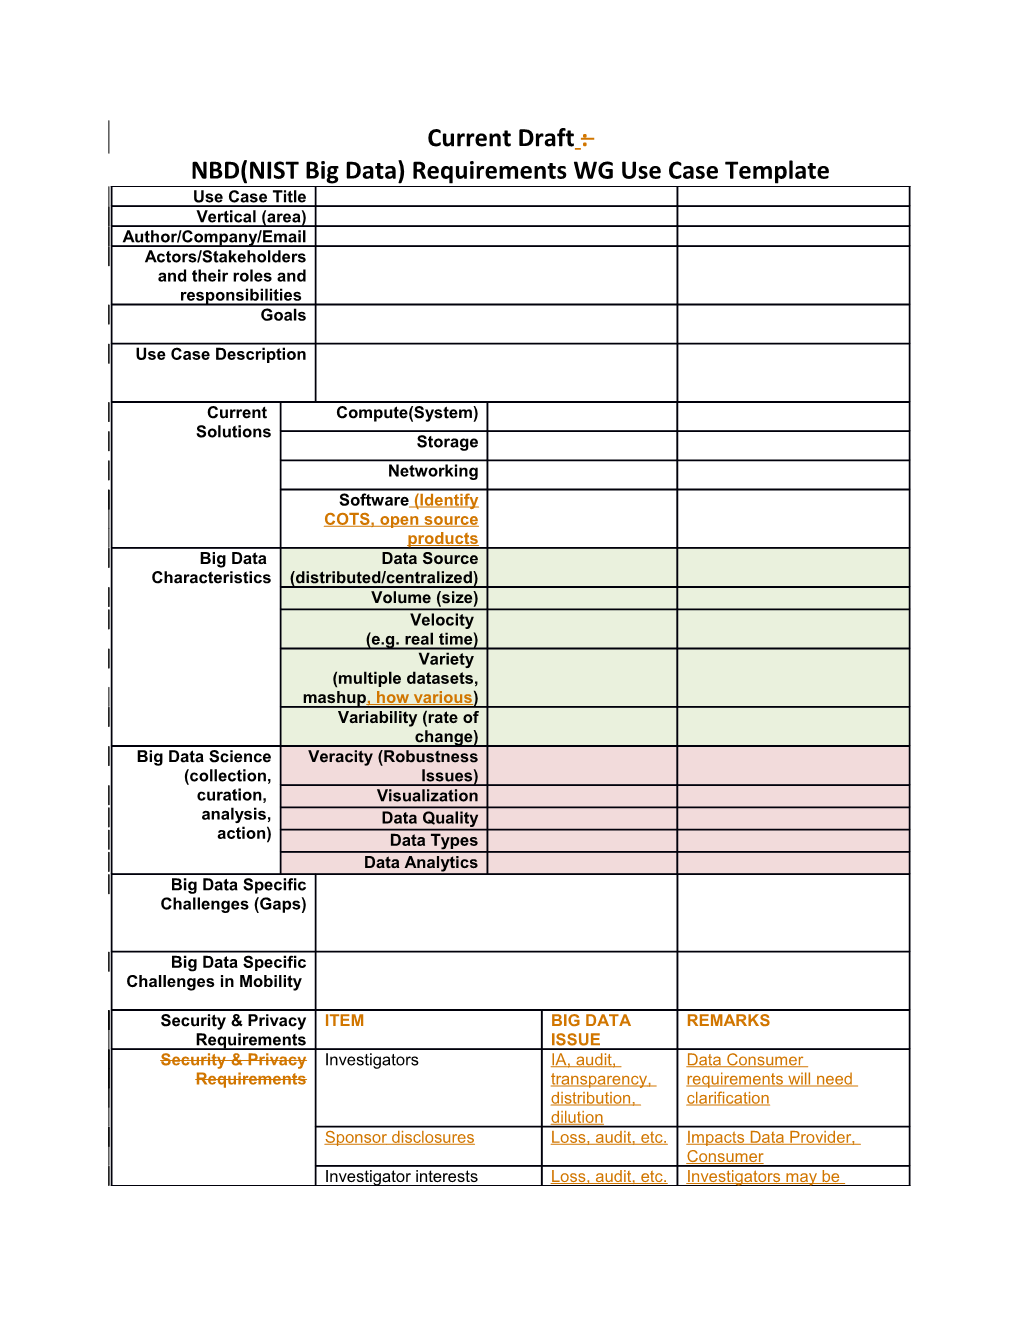 NBD(NIST Big Data) Requirements WG Use Case Template